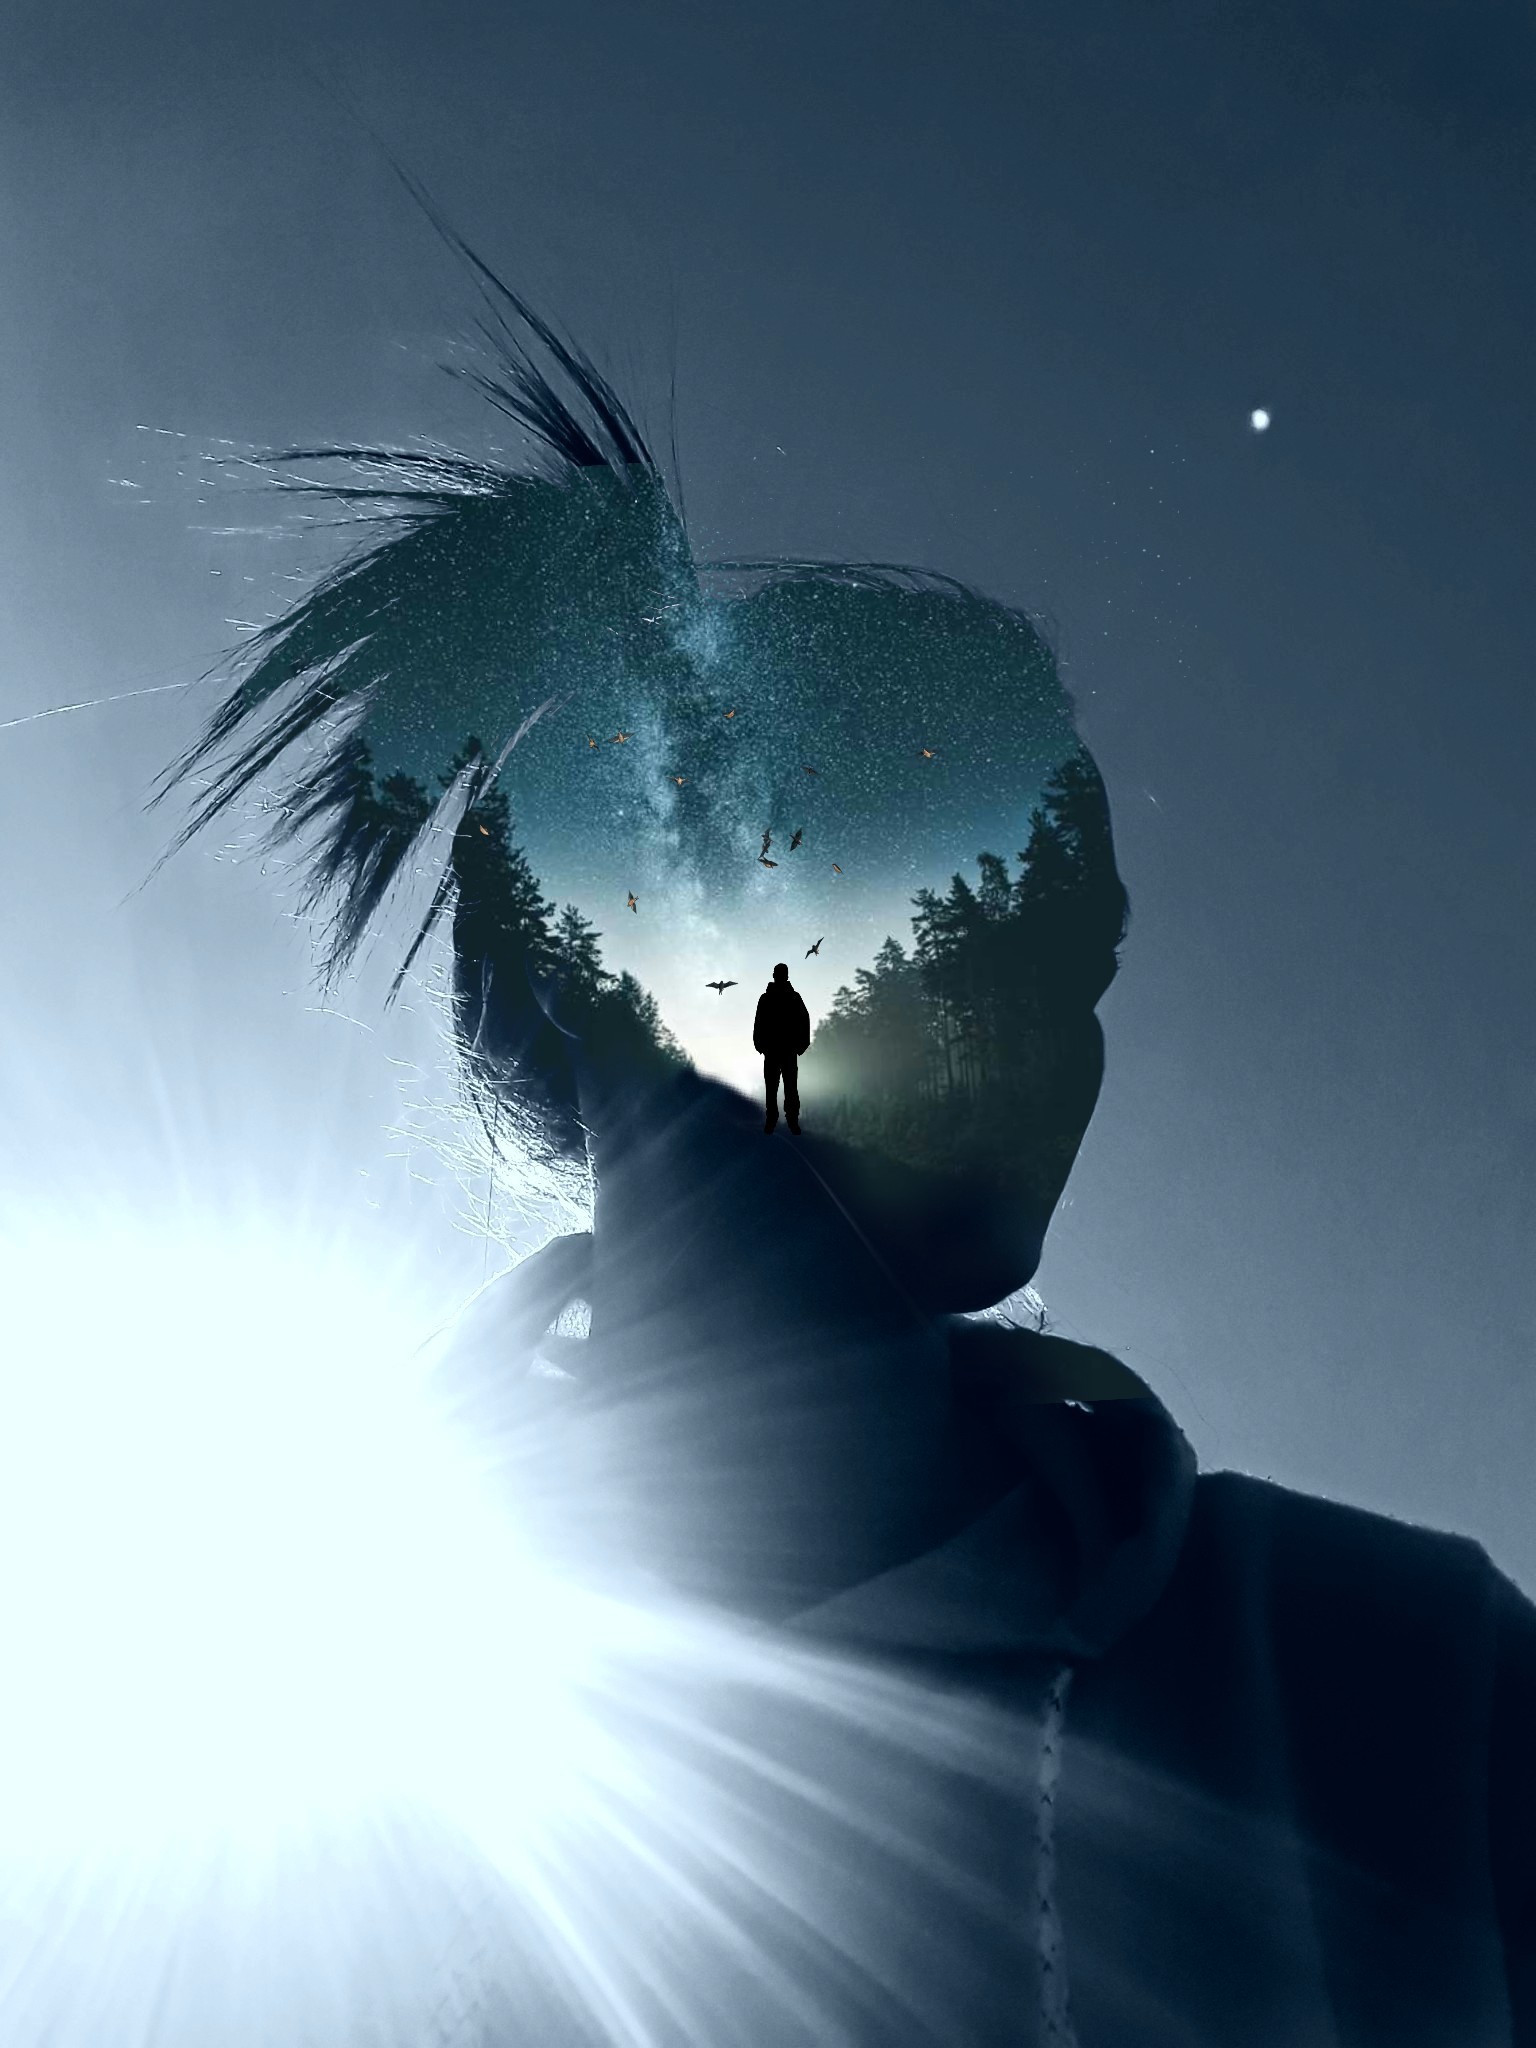  #freetoedit Happy day/evening to all ðââï¸ððð @pa @freetoedit #myphoto #myedit  #photography #me #silhouette #girl #doubleexposure #man #moon #forest #birds #blue 